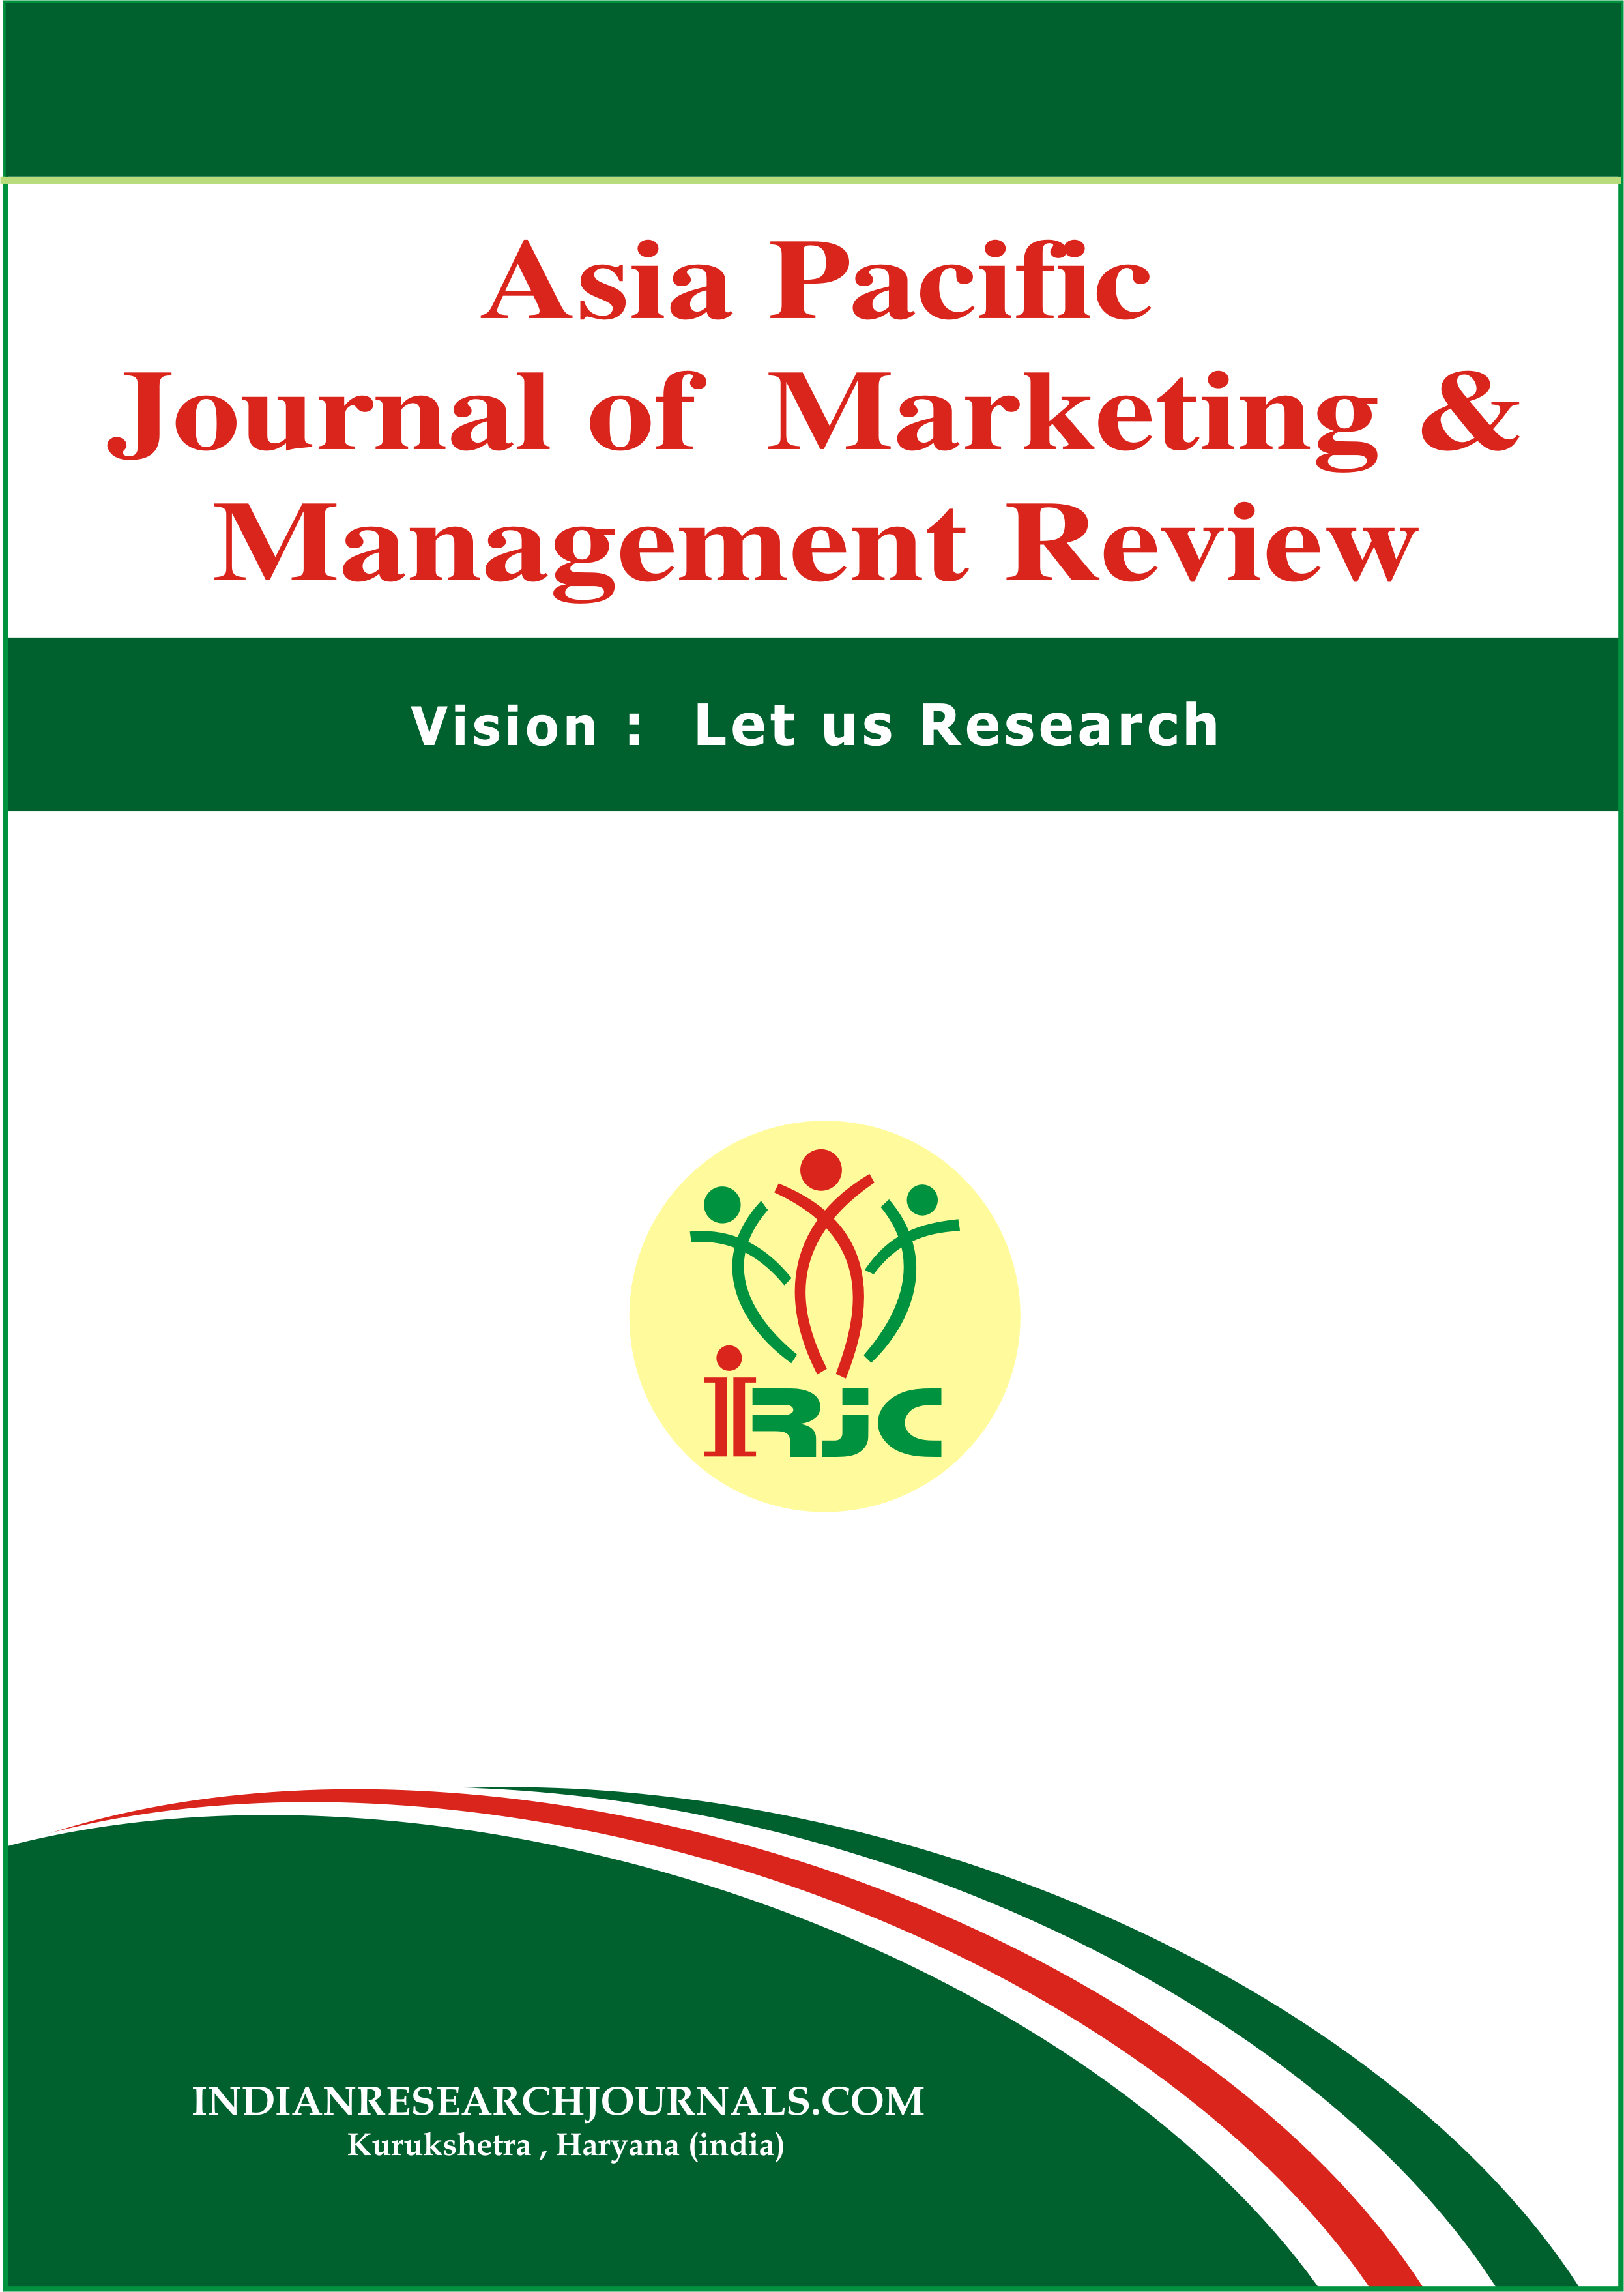 					View Vol. 12 No. 04 (2023): ASIA PACIFIC JOURNAL OF MARKETING & MANAGEMENT REVIEW
				